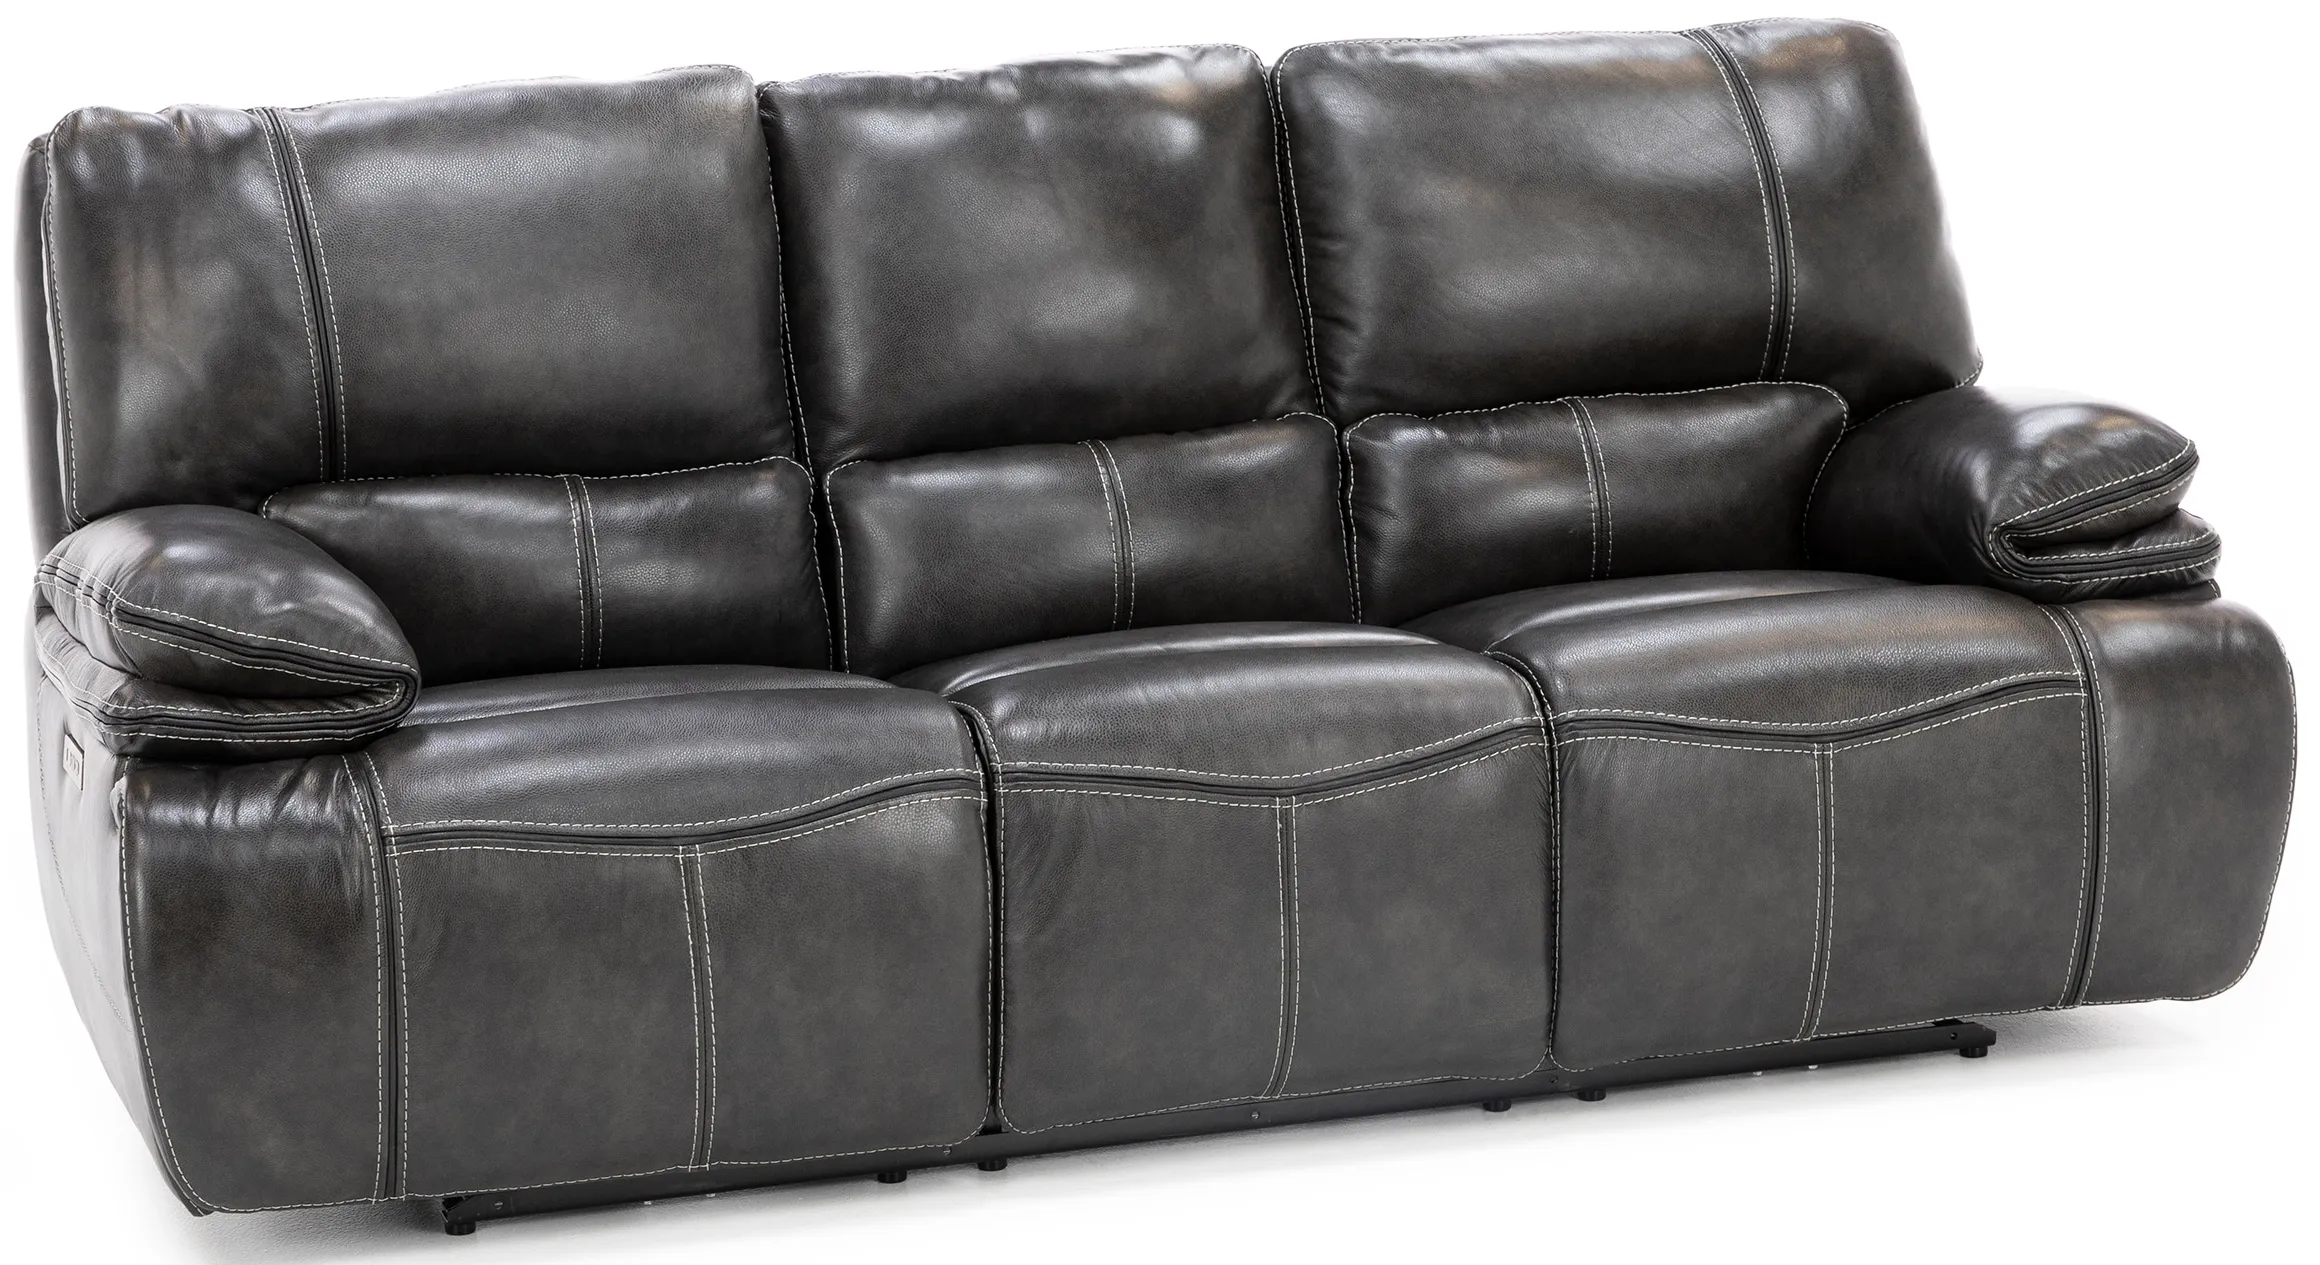 Sherman Leather Power Headrest Reclining Sofa in Charcoal